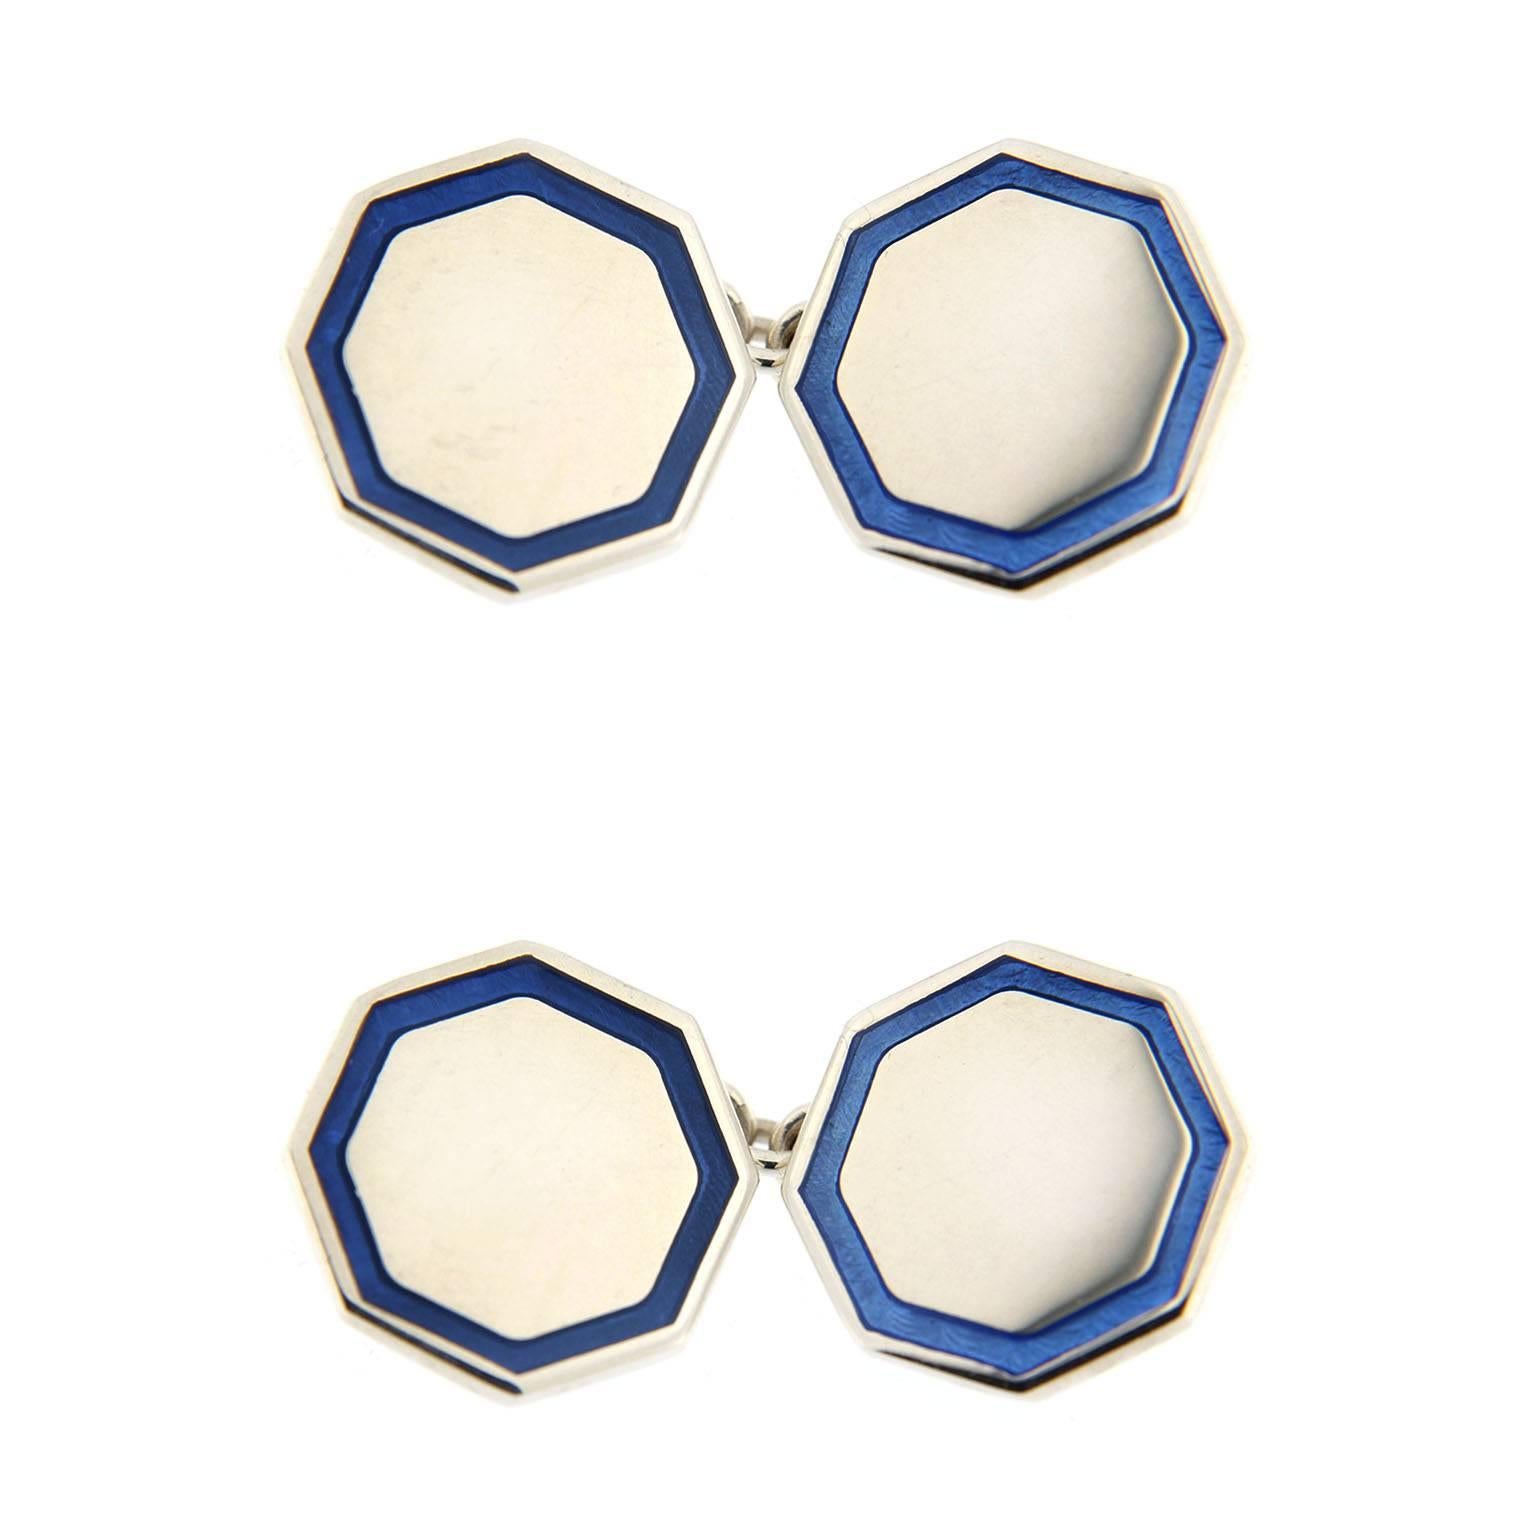 Jona design collection, hand crafted in Italy, octagonal sterling silver cufflinks with blue and light blue enamel.

All Jona jewelry is new and has never been previously owned or worn. Each item will arrive at your door beautifully gift wrapped